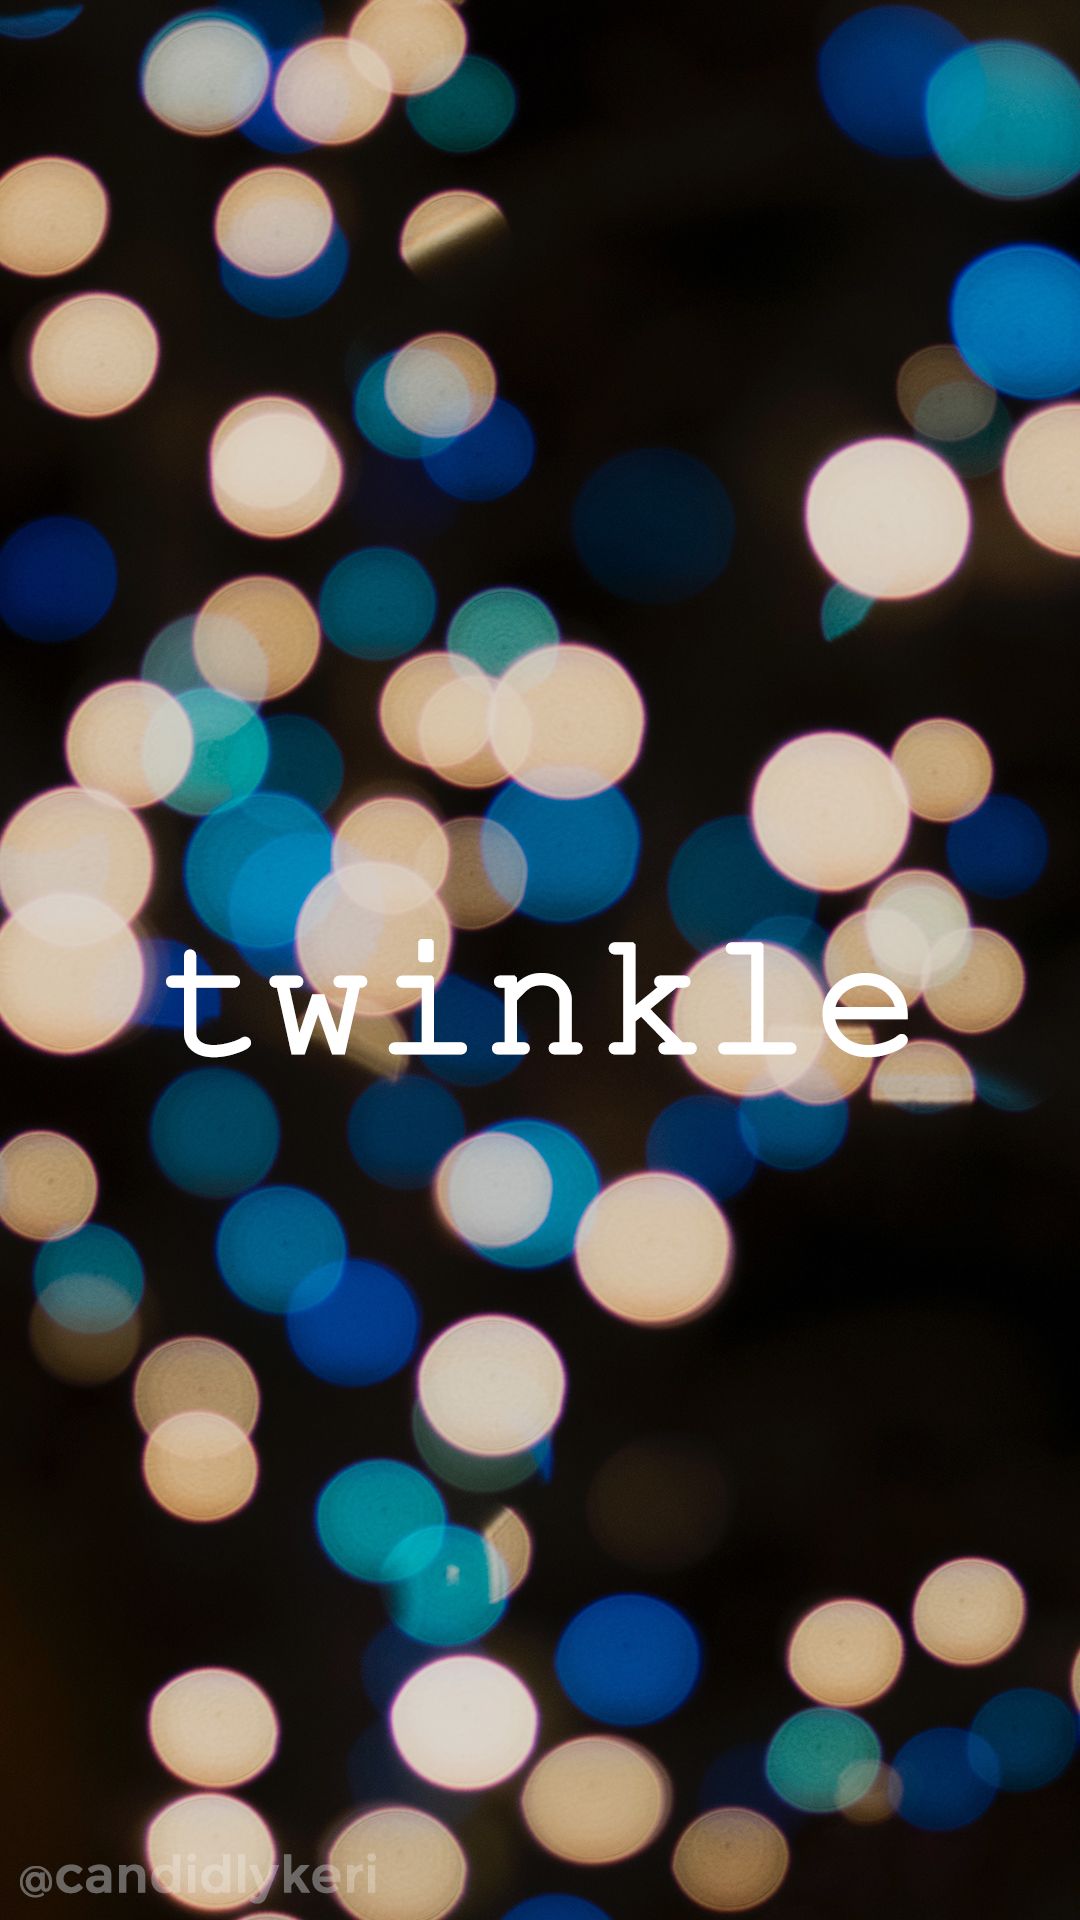 Twinkle Blue Light Lights Background Wallpaper You Can